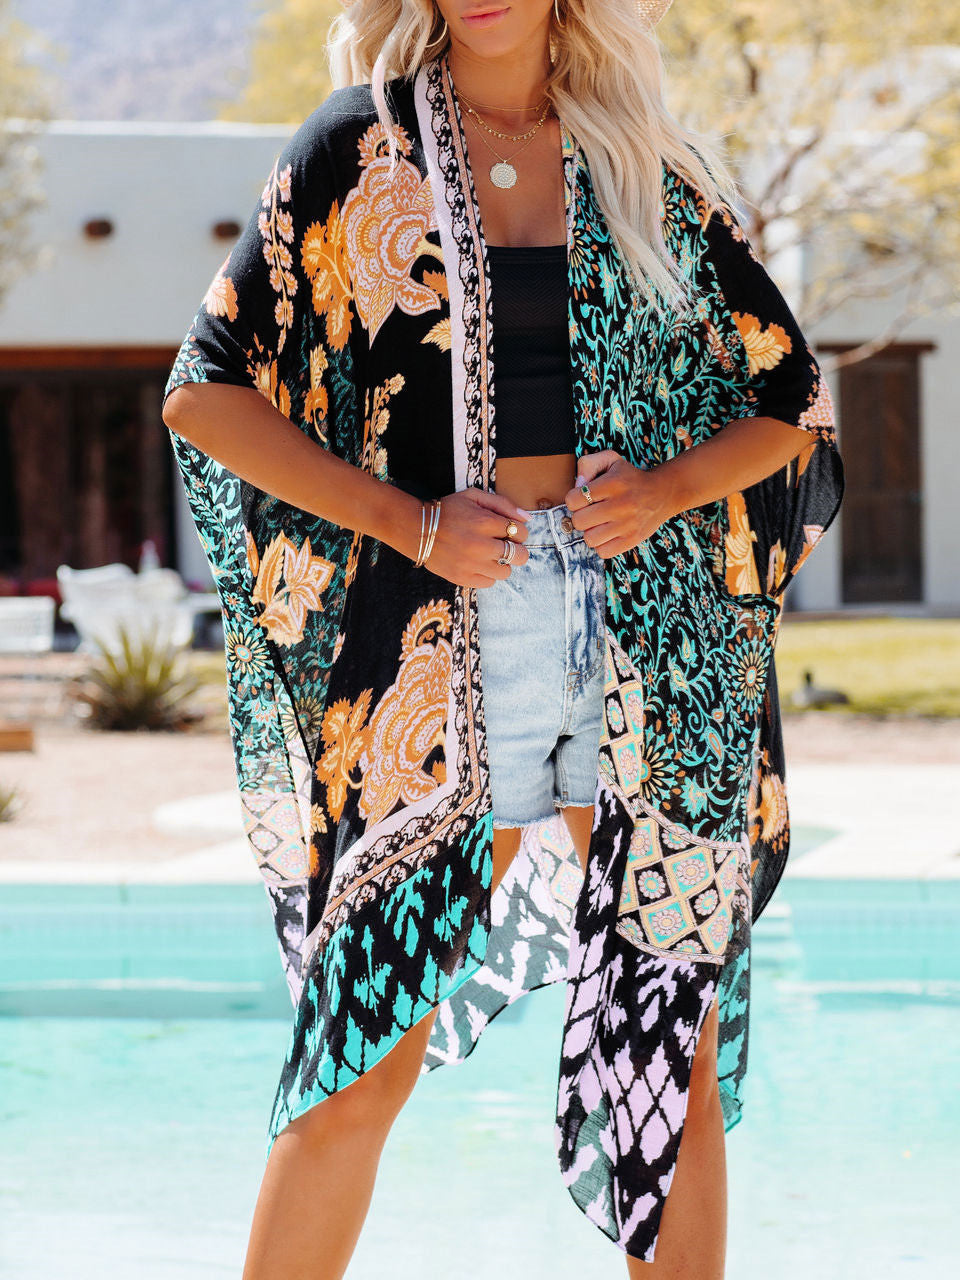 A woman wearing a vibrant printed Tropical Beach Cardigan Cover Up by Beachy Cover Ups by a pool.